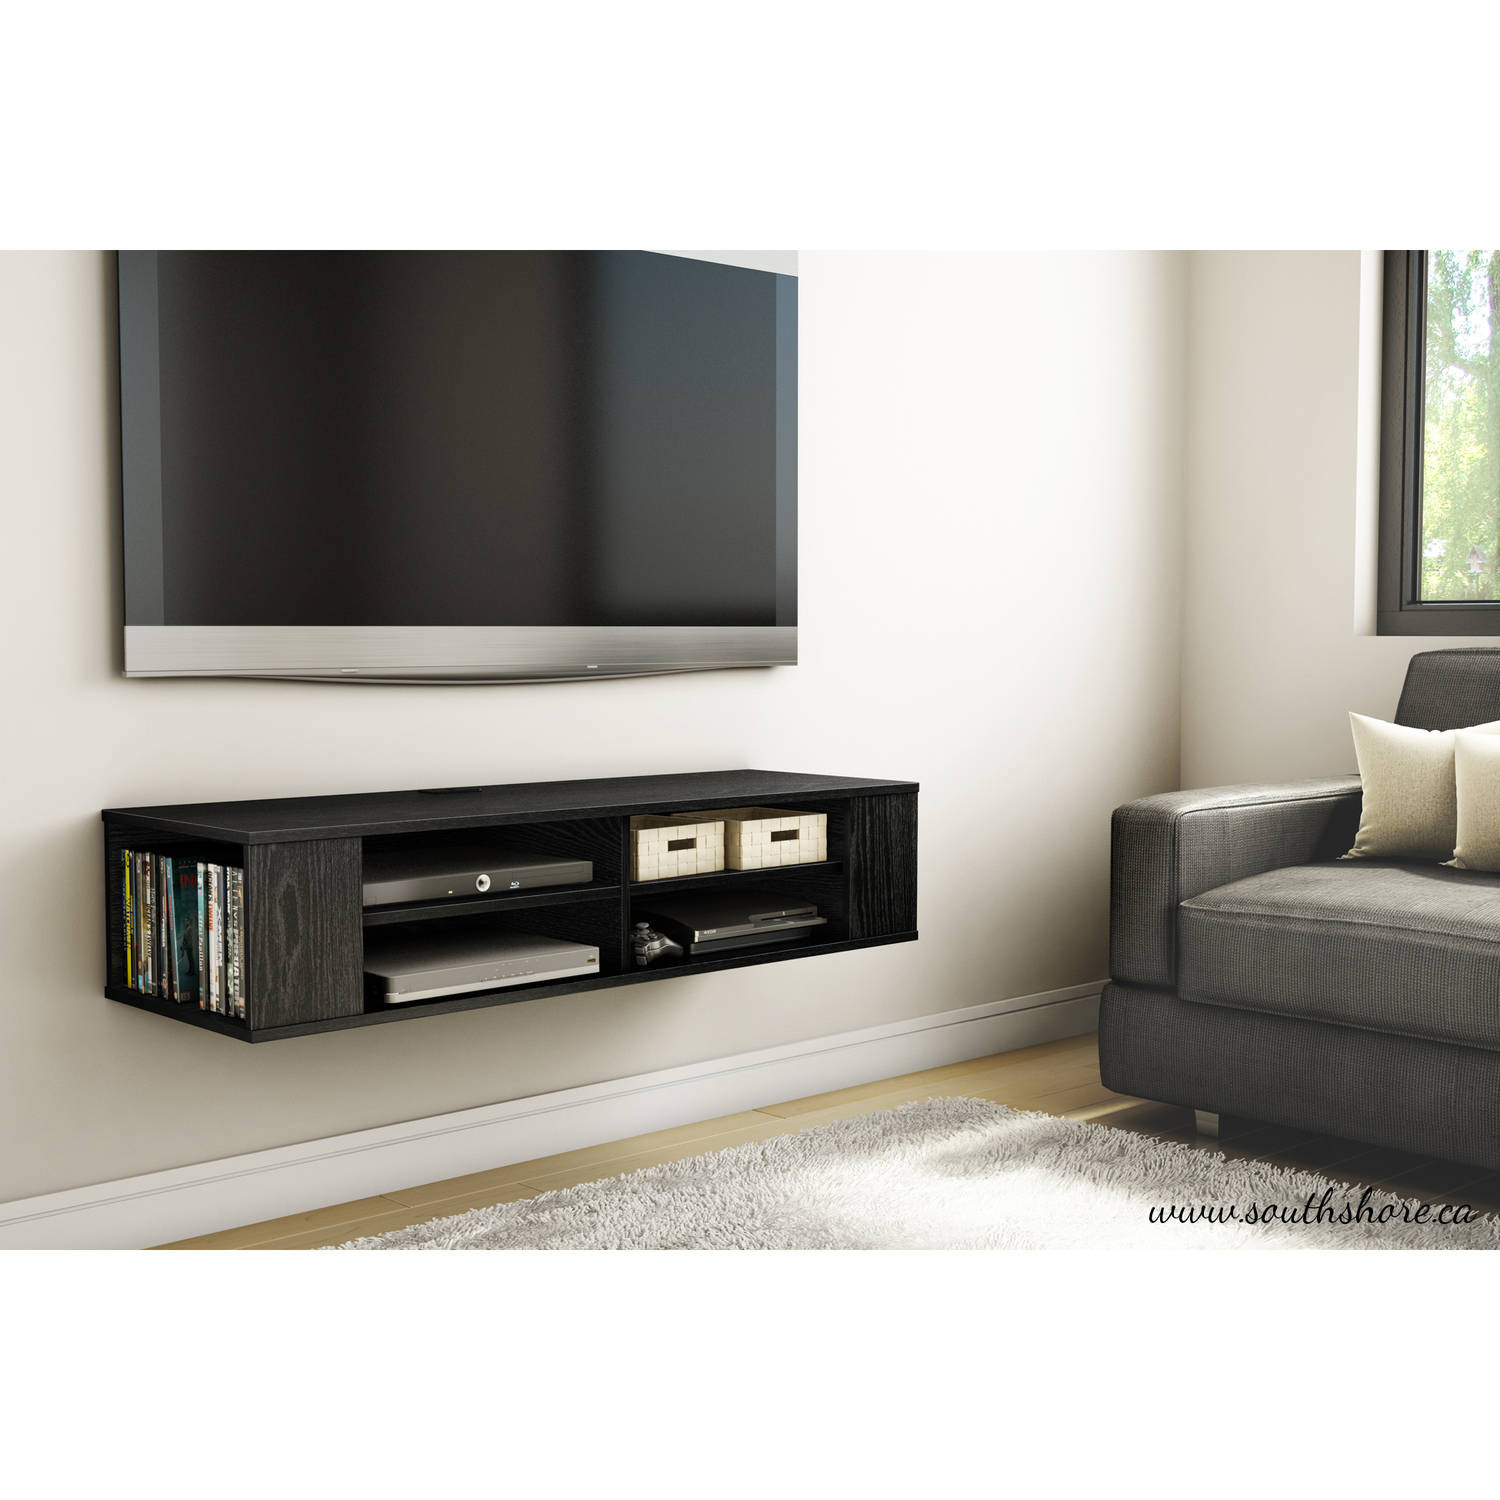 Wall Mounted Media Console Black Tv Stand Entertainment Center Floating Cabinet